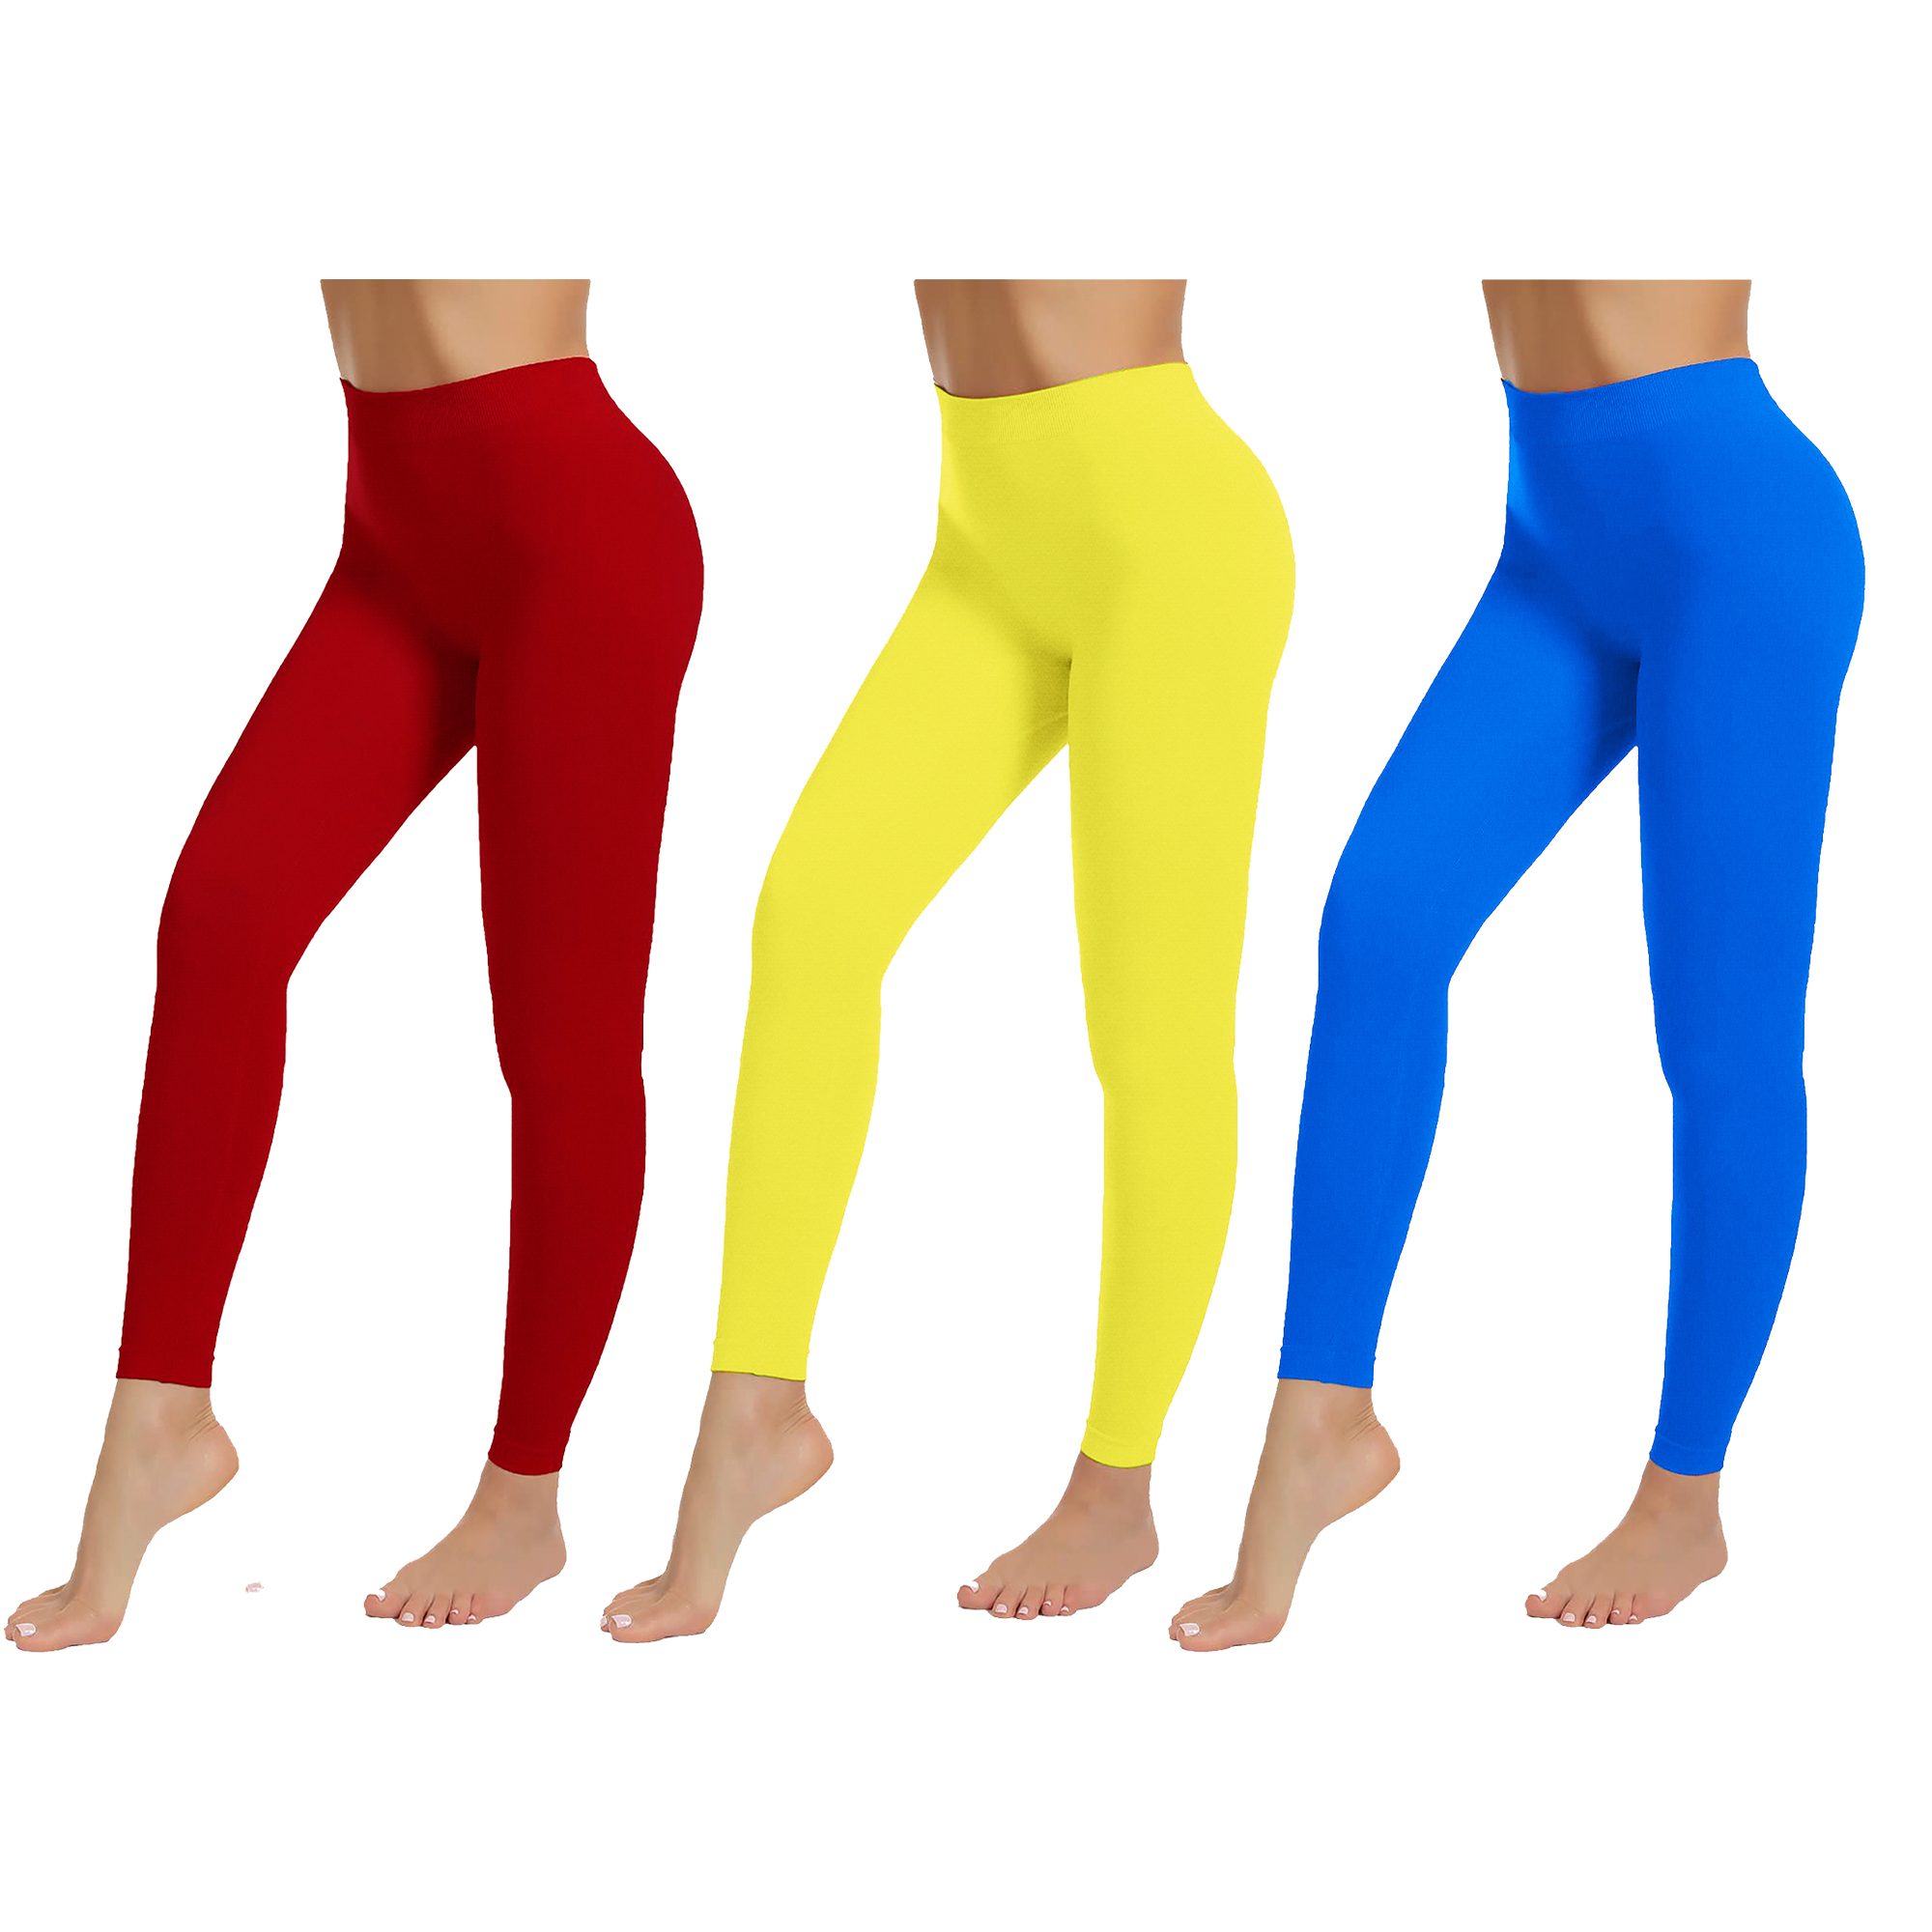 3-Pack: Women's High-Waist Ultra-Soft Stretchy Solid Fitness Yoga Leggings Pants - RED, L